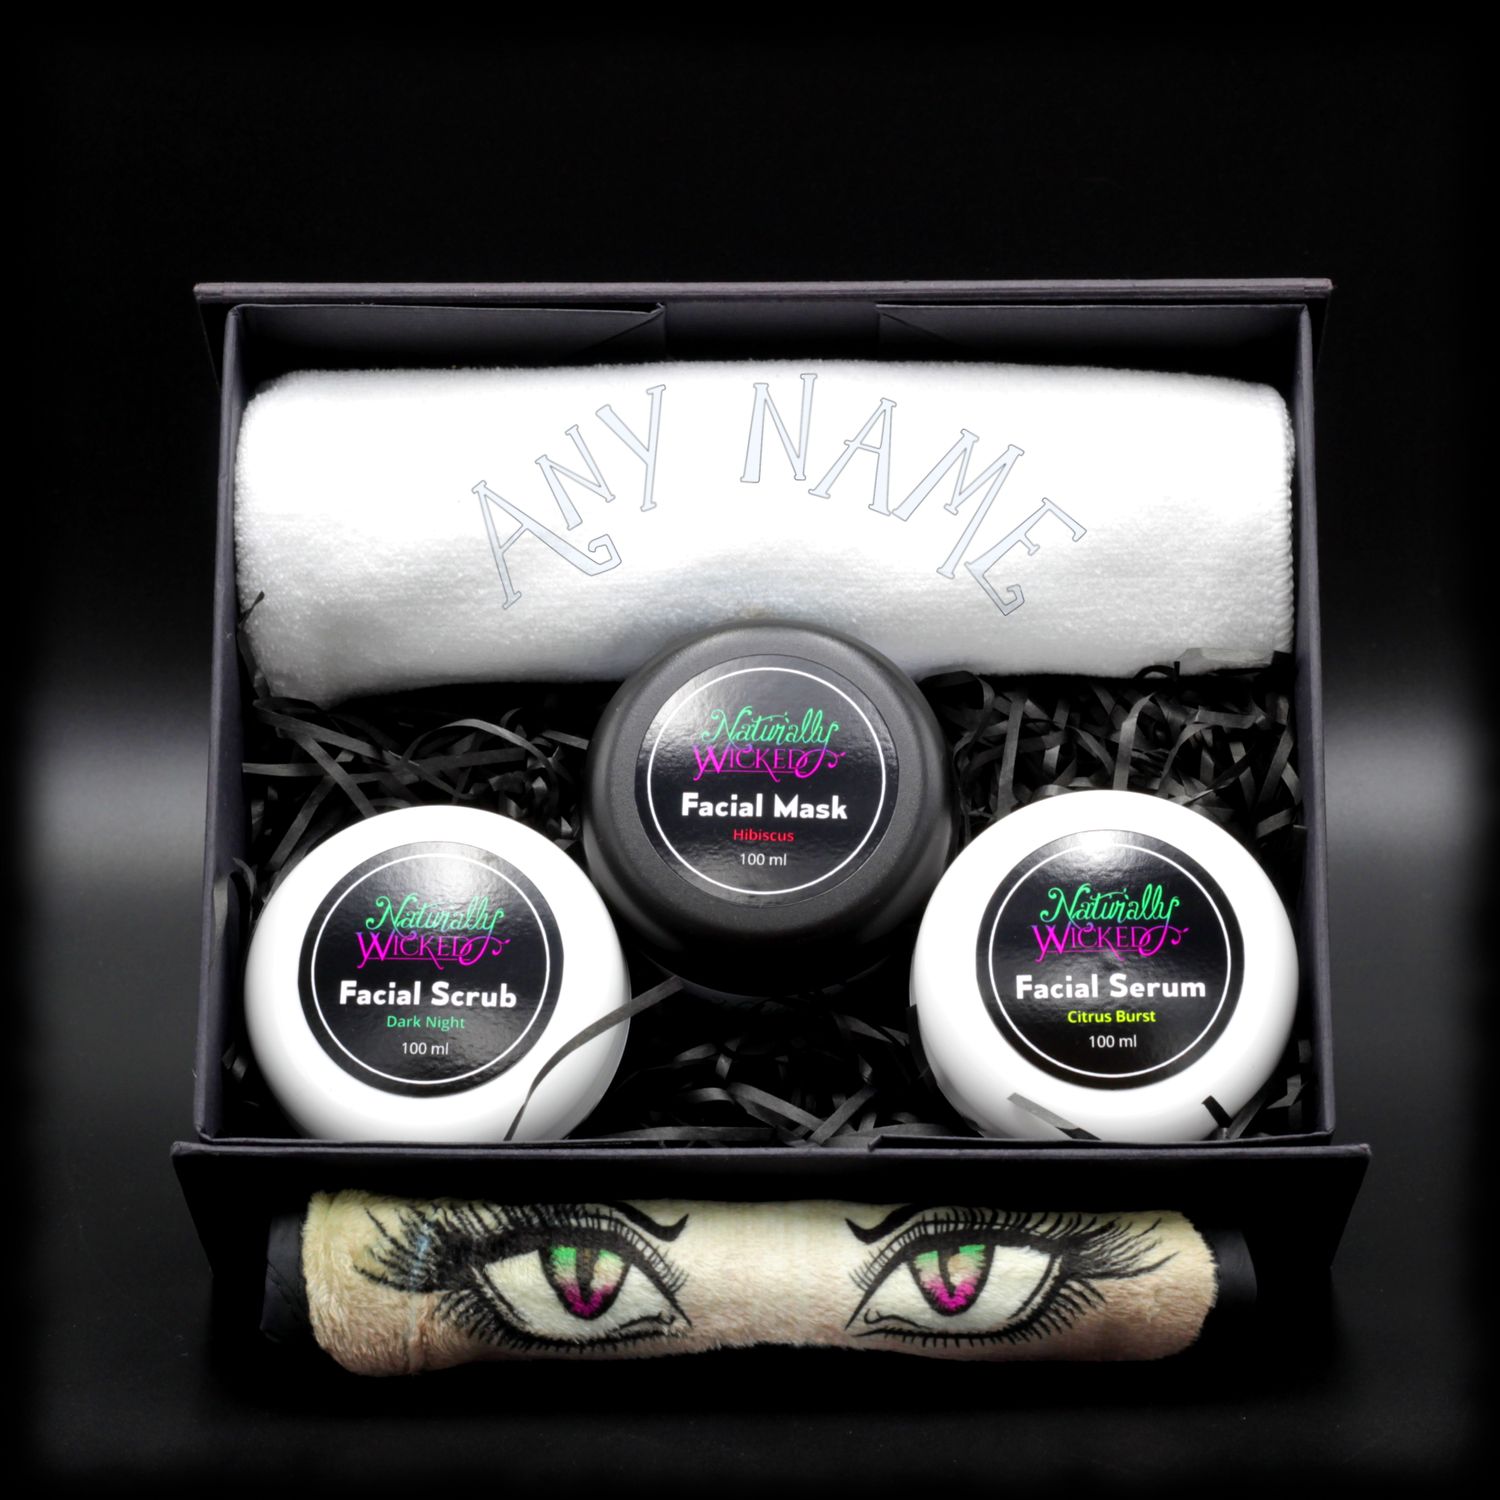 Naturally Wicked Facial Kit With Personalised Wicked Ice Queen Towel, Facial Scrub, Facial Mask & Facial Serum - Perfect Gift For Her